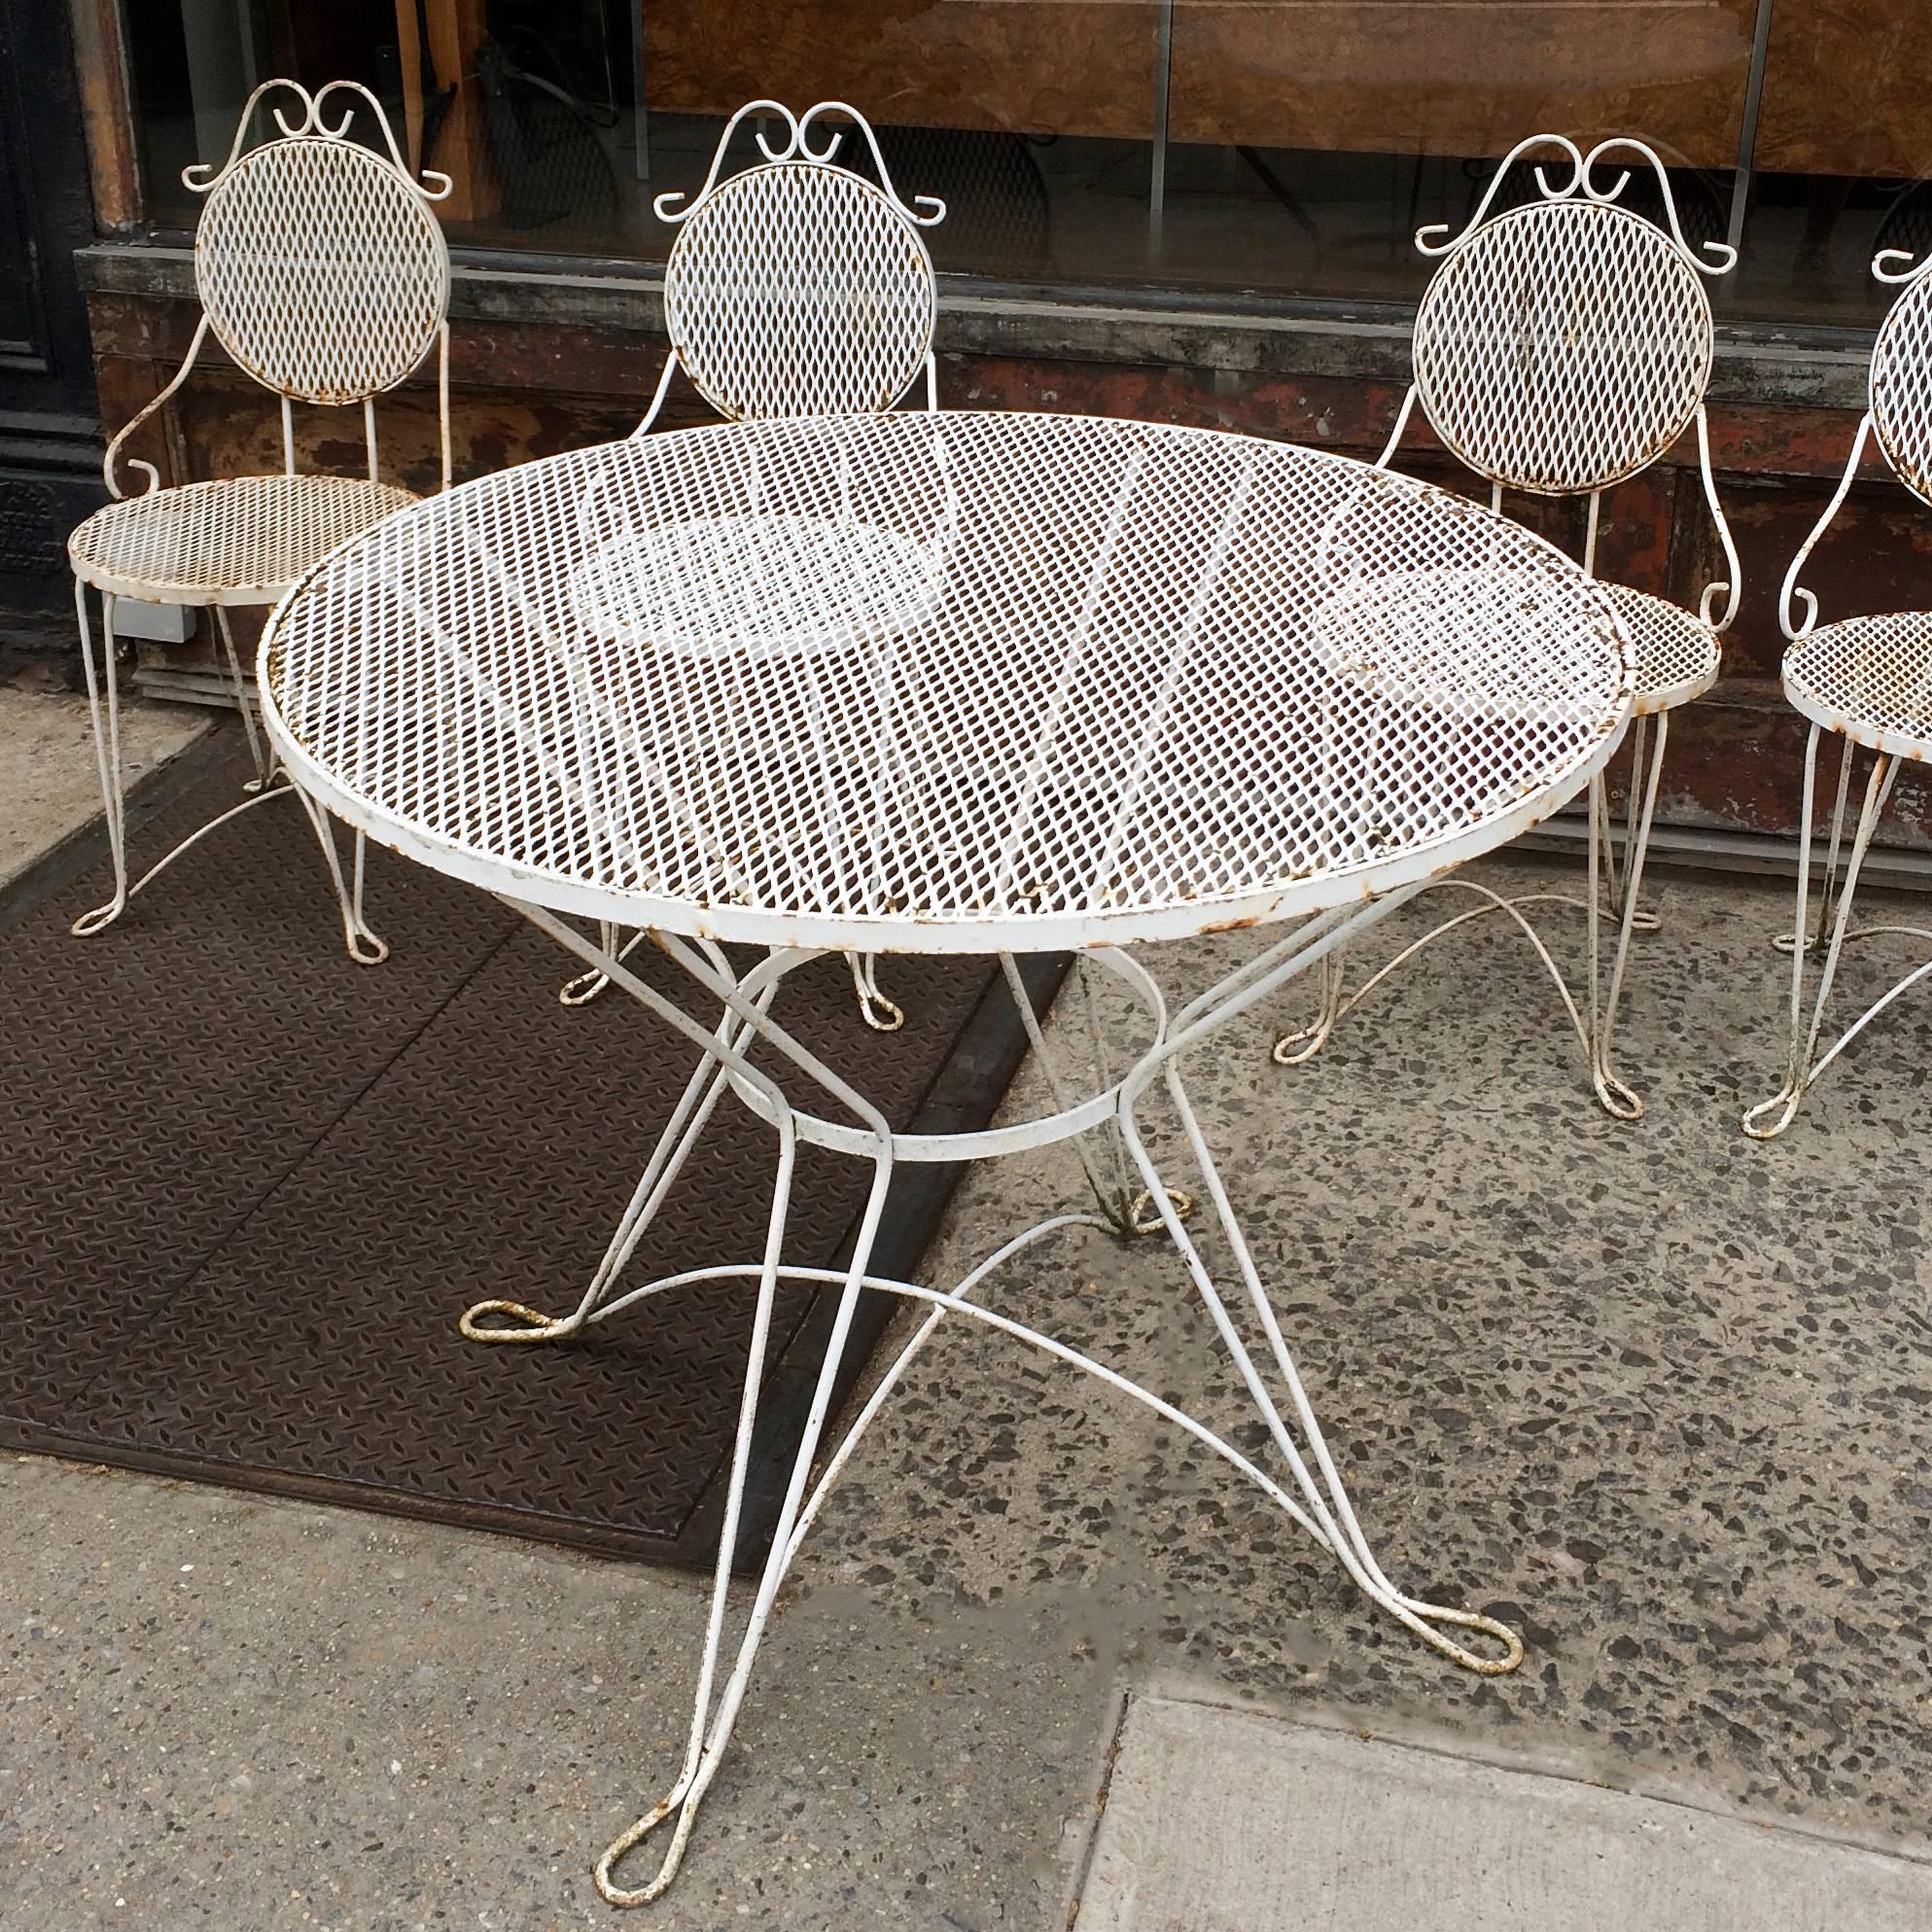 Painted Mid-Century Wrought Iron Outdoor Patio Dining Set